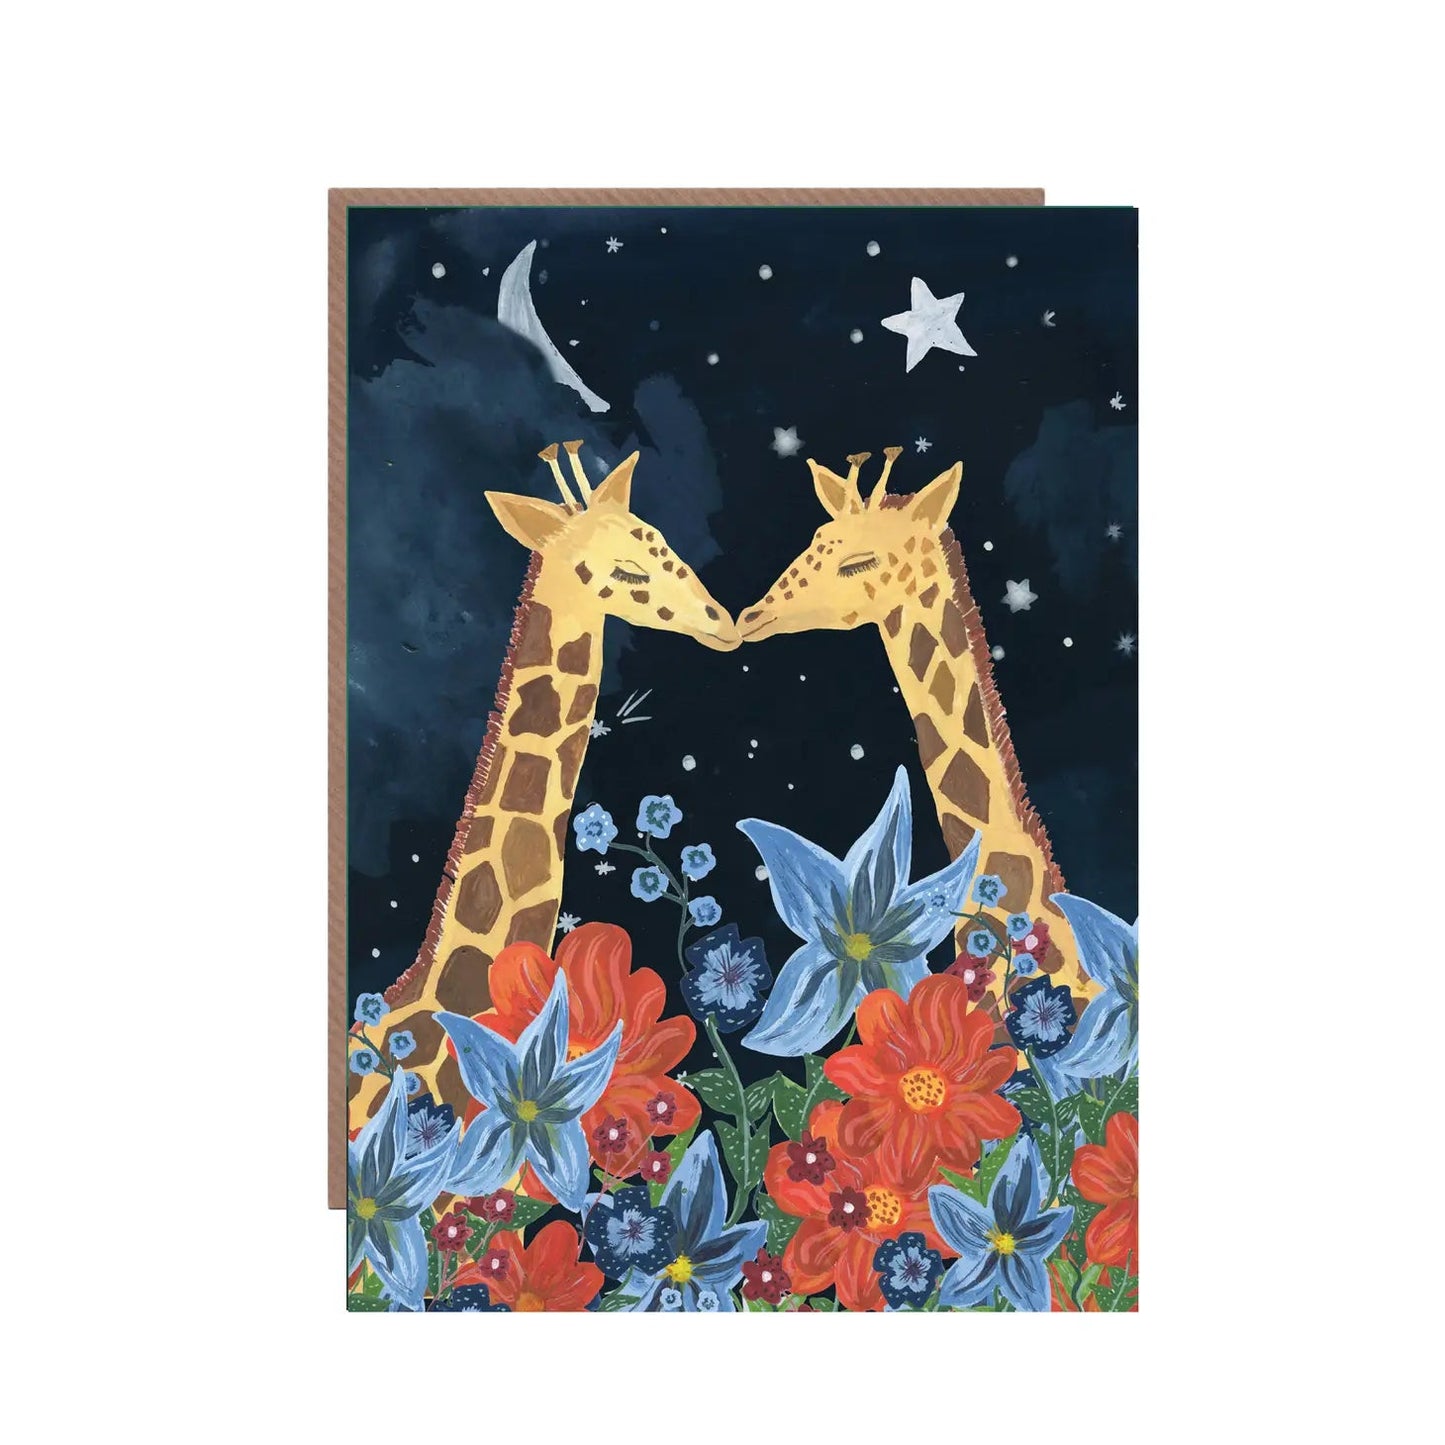 Our planet moonlight giraffe blank Greeting Card - HCWB277 - The Hare and the Moon